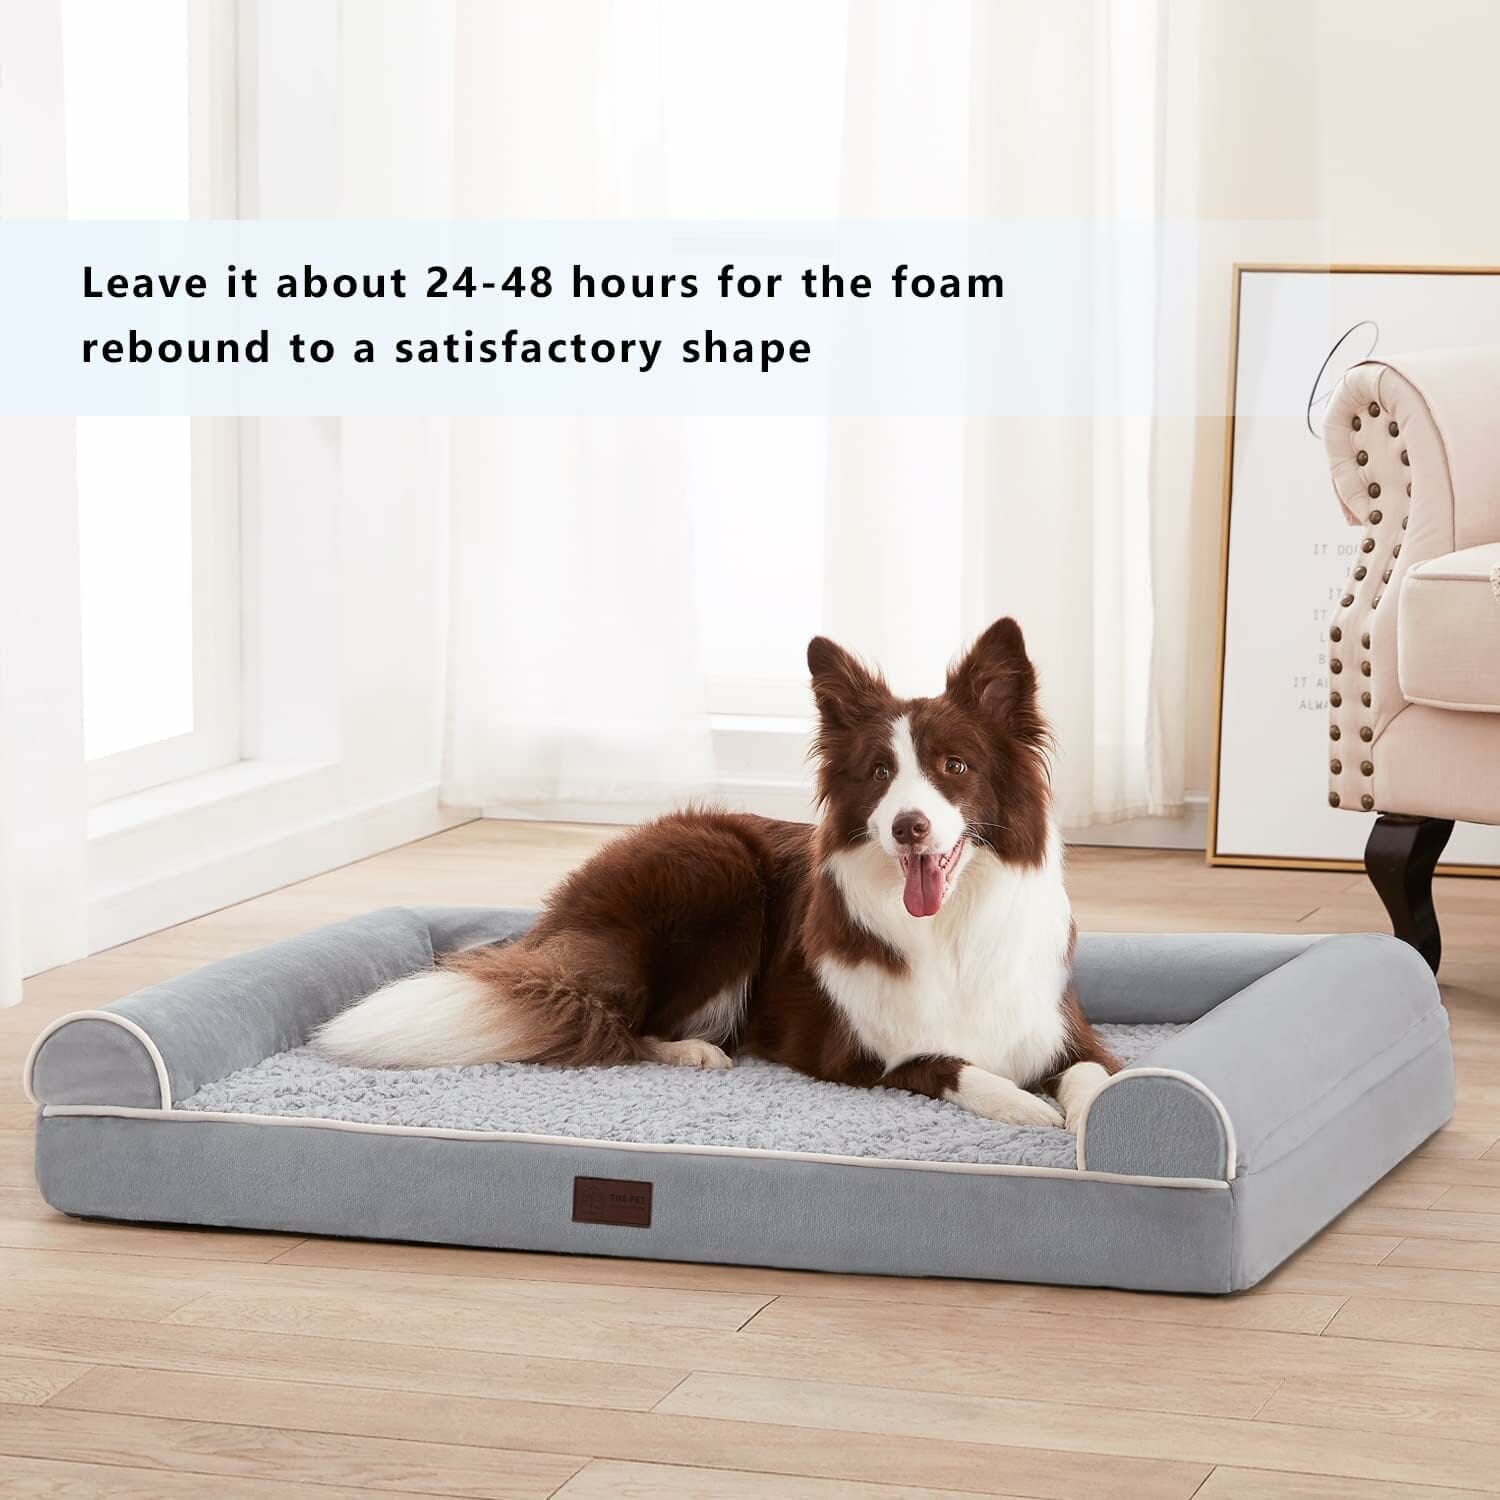 WESTERN HOME Orthopedic Dog Bed Review – The Ultimate Comfort for Your Pup?